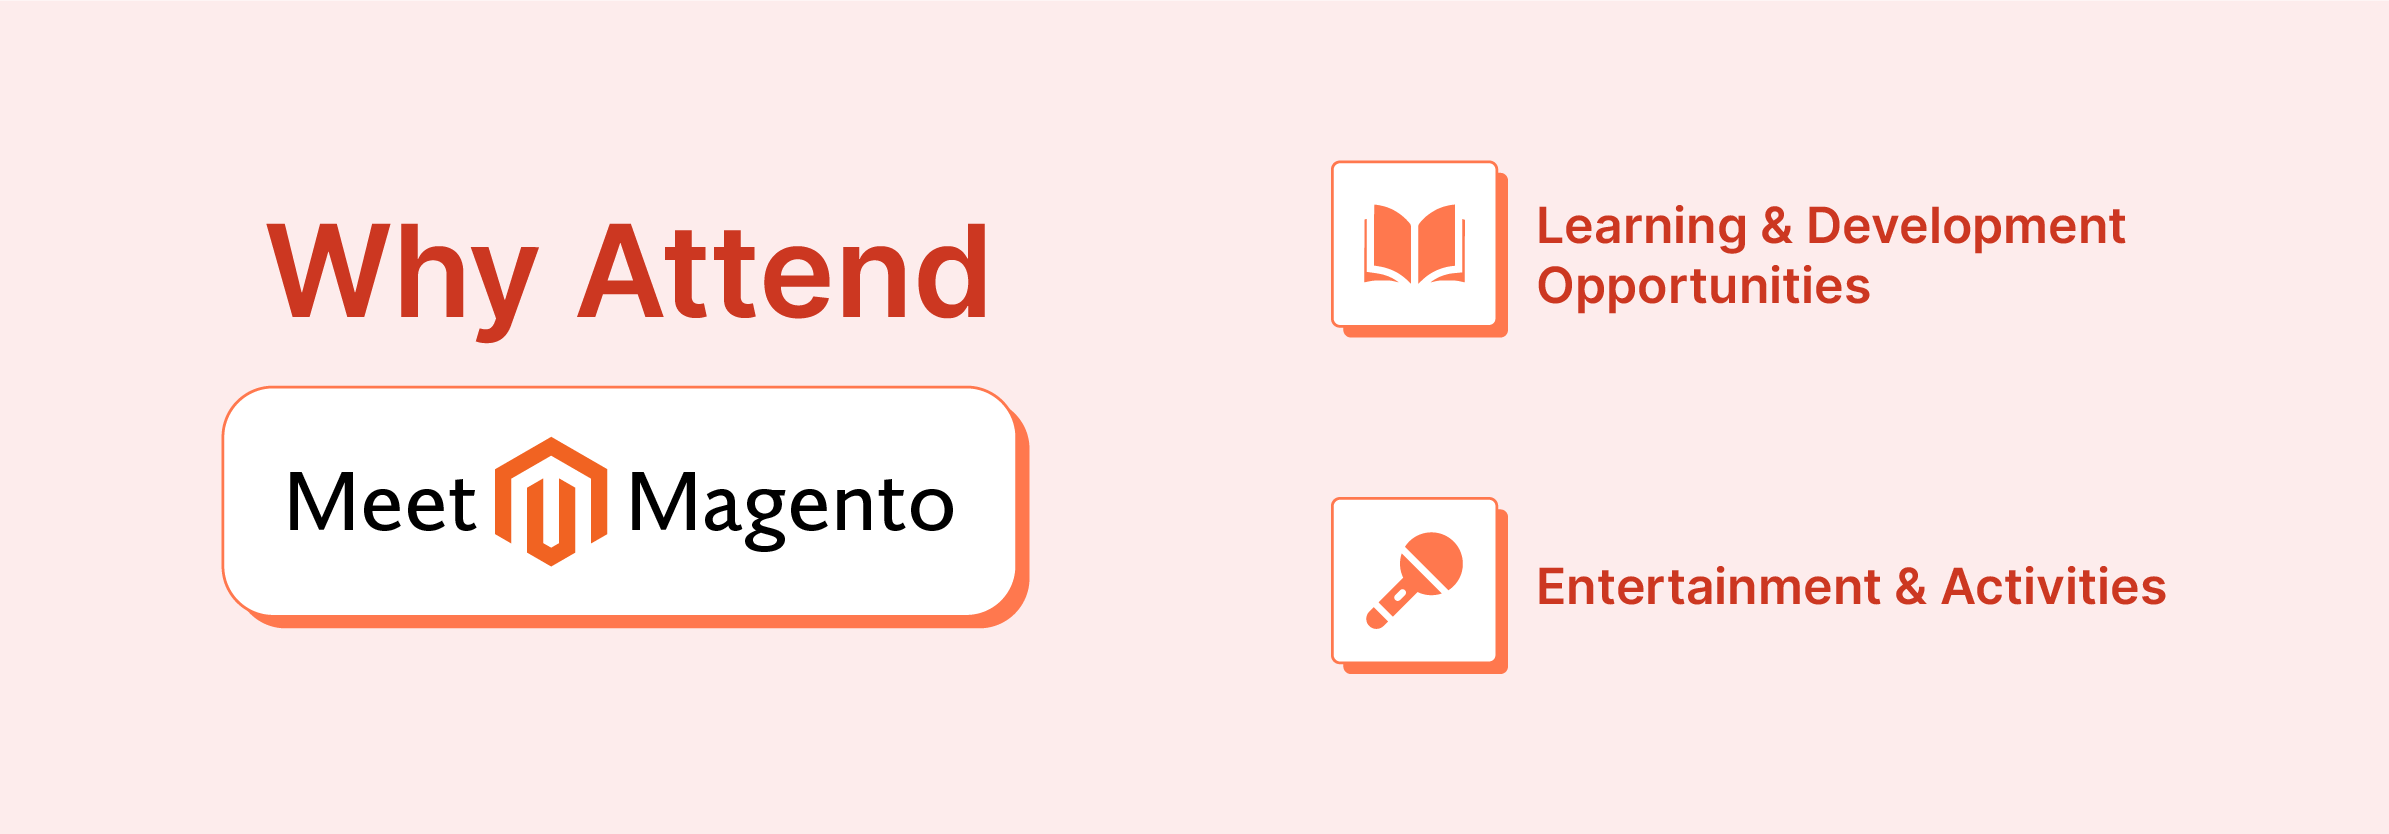 Reasons to Attend a Meet Magento Event